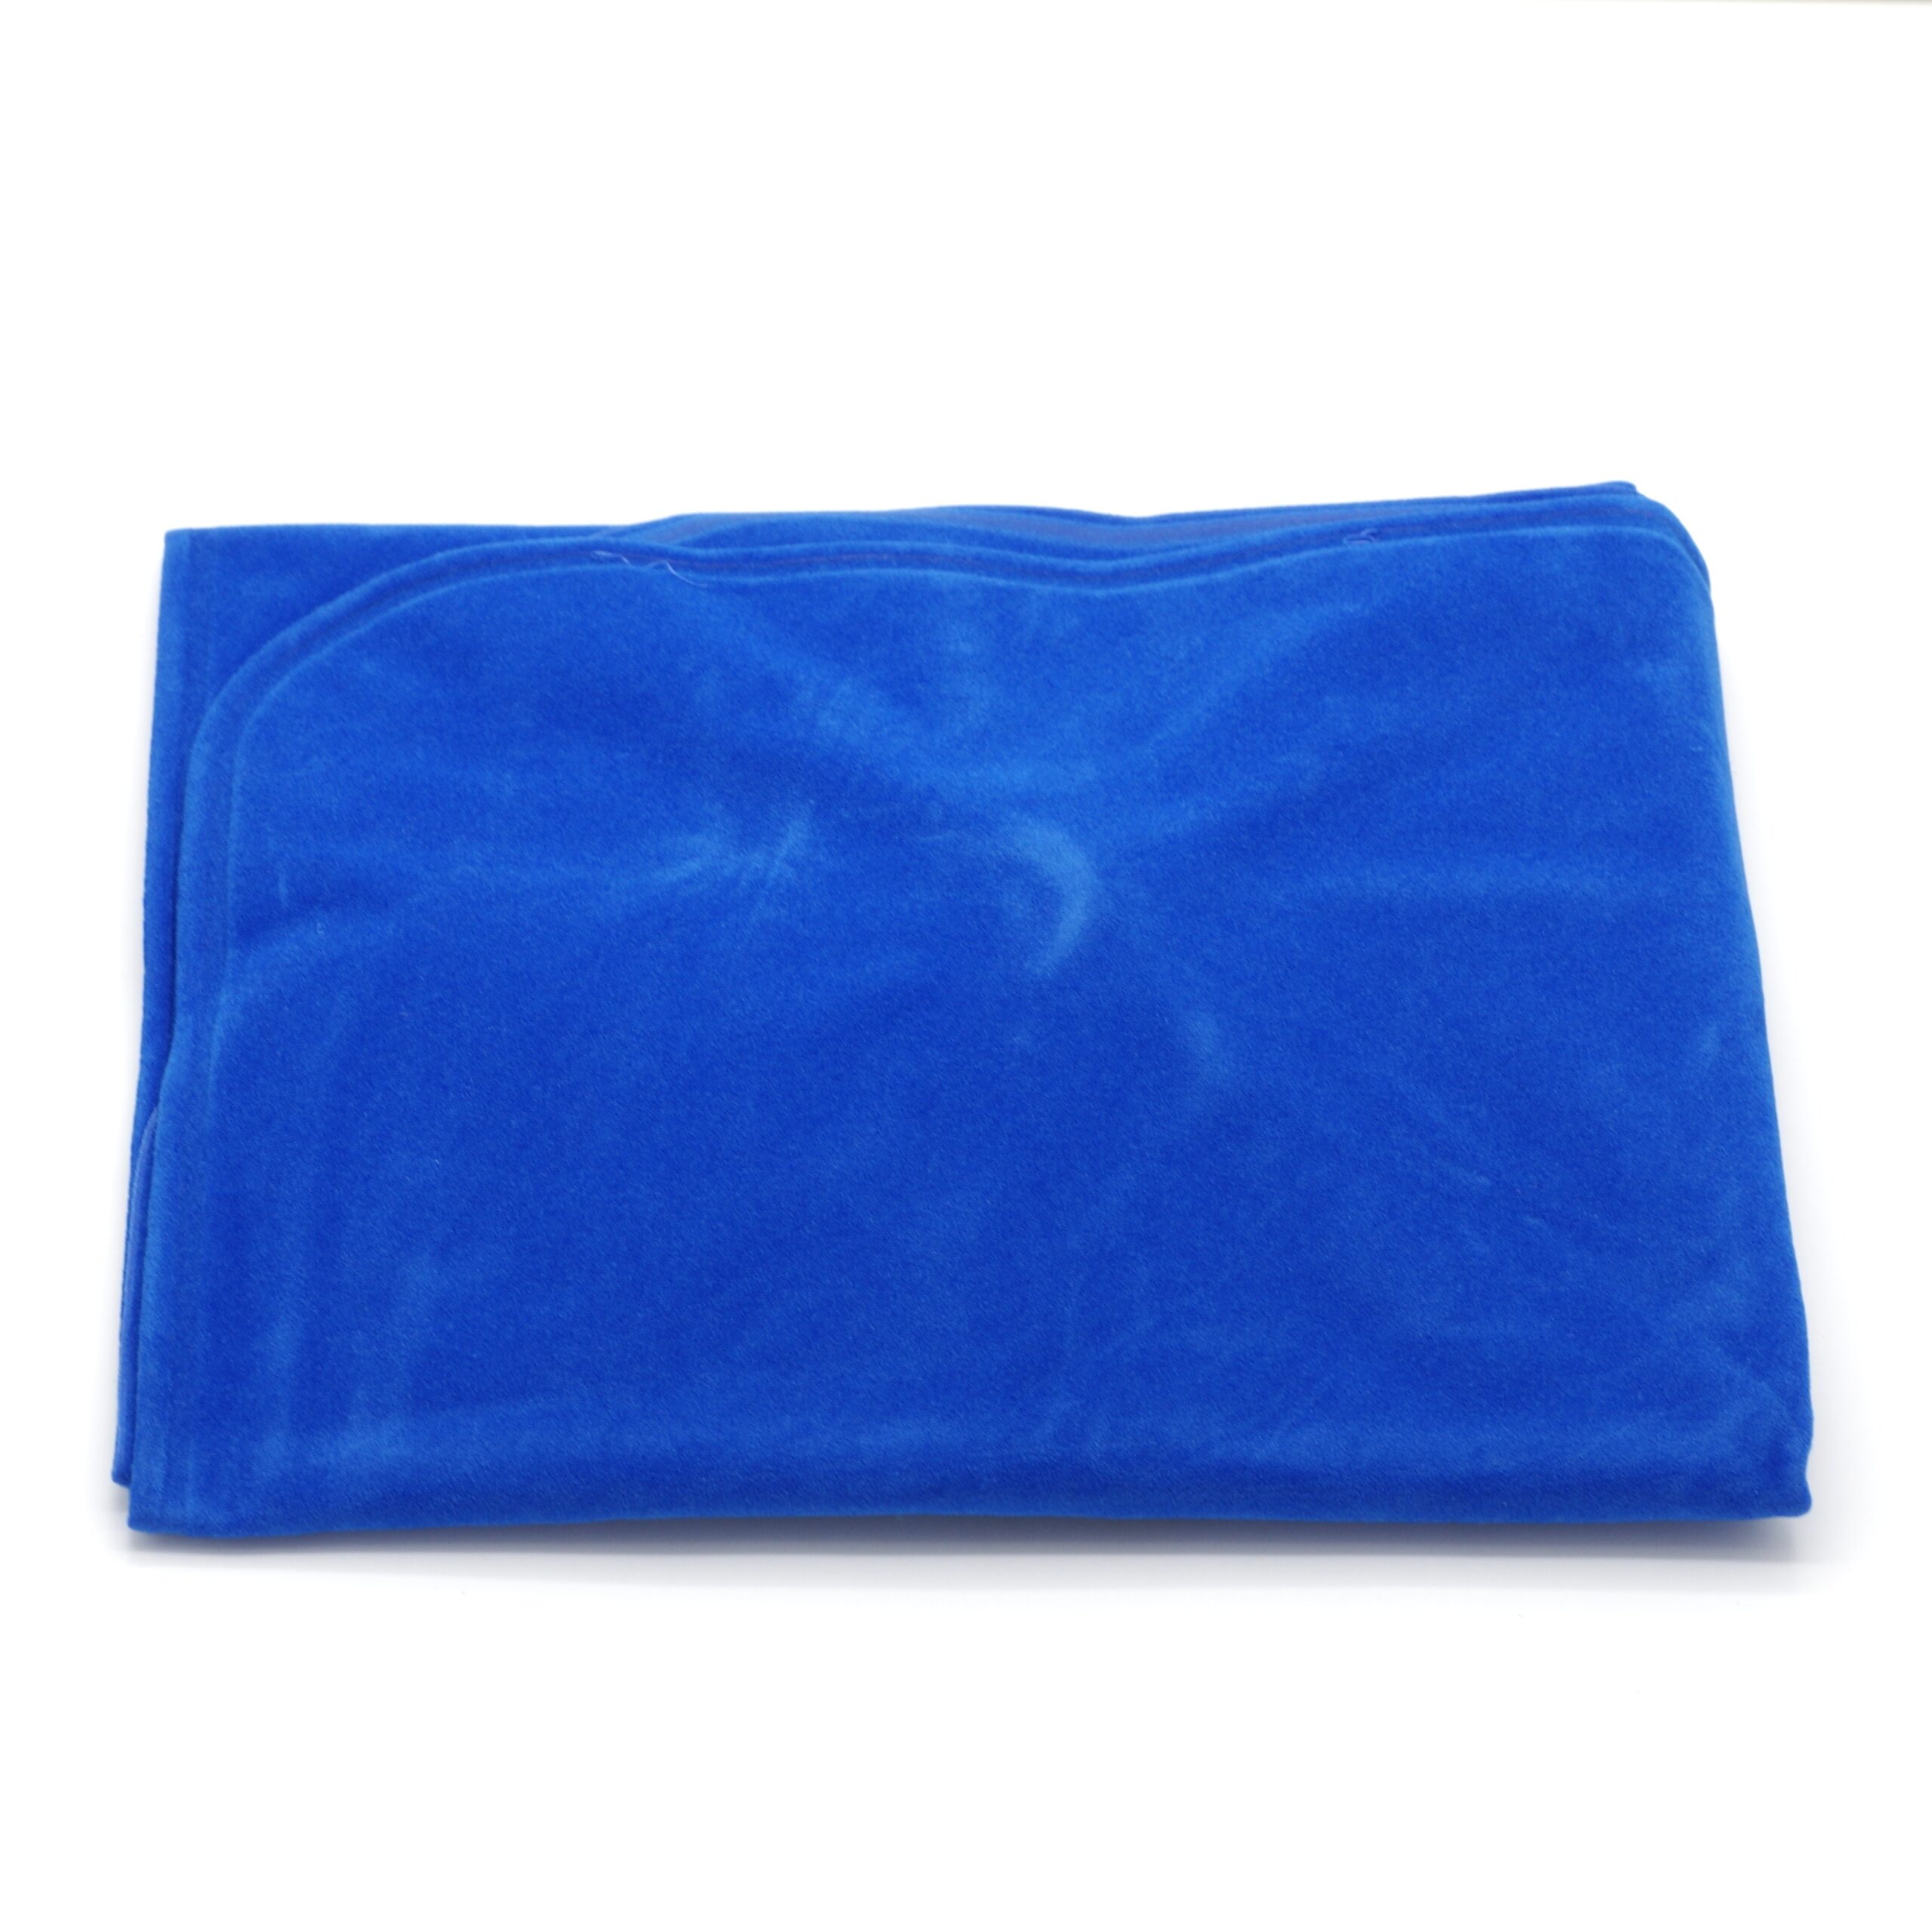 https://www.sf-shop.ch/wp-content/uploads/p/9/1/5/915-Coussin-gonflable-Bleu-scaled.jpg